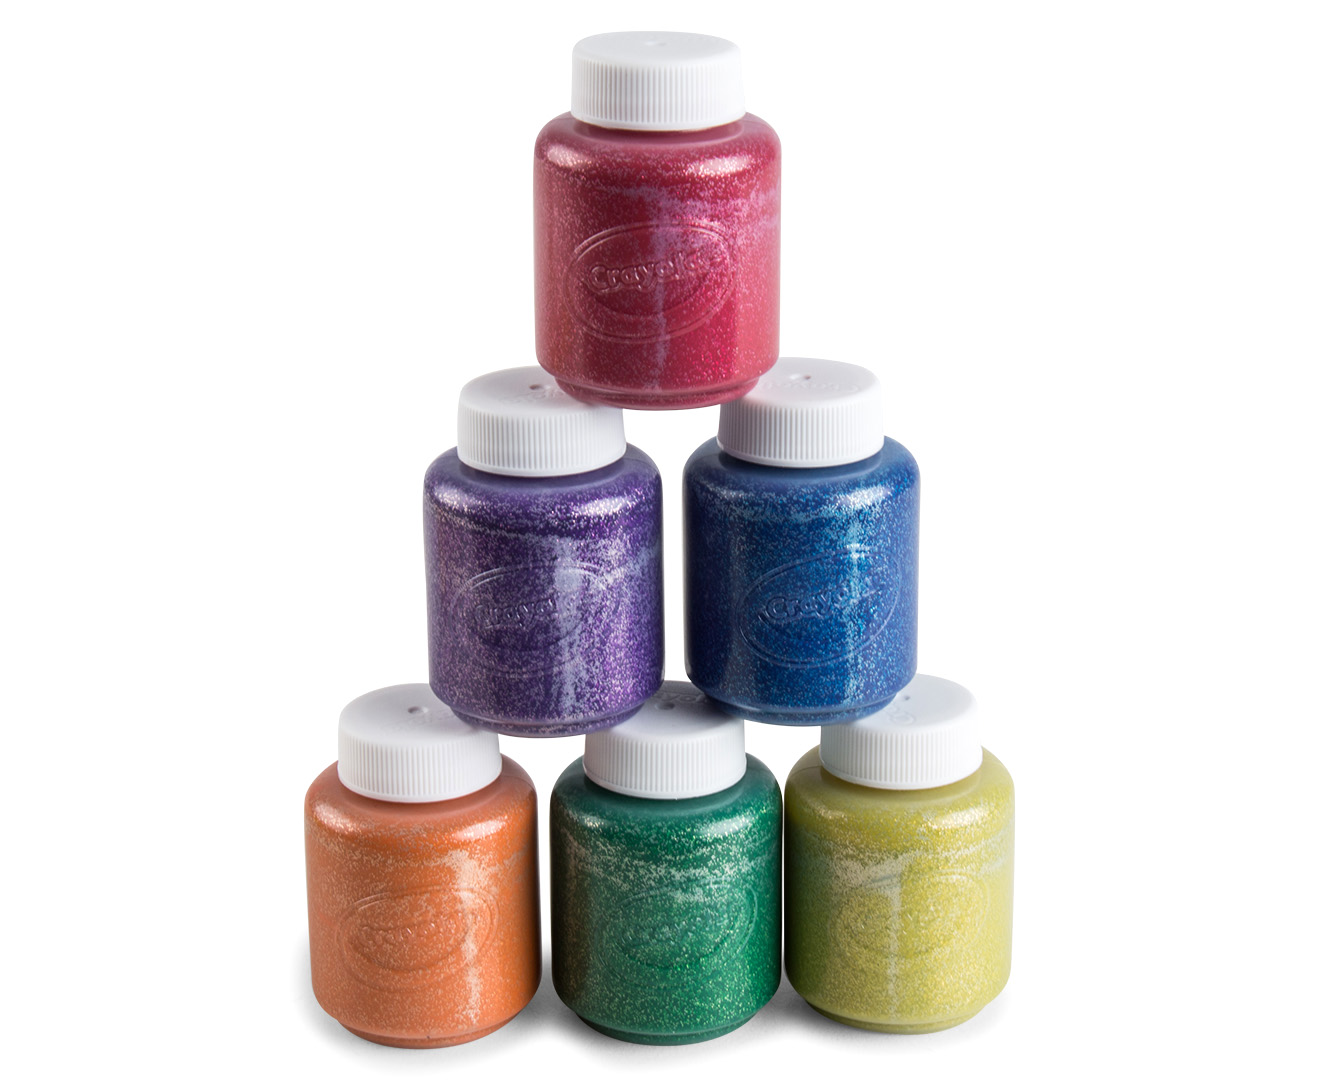 Crayola Washable Glitter Paint 6-Pack | Catch.co.nz